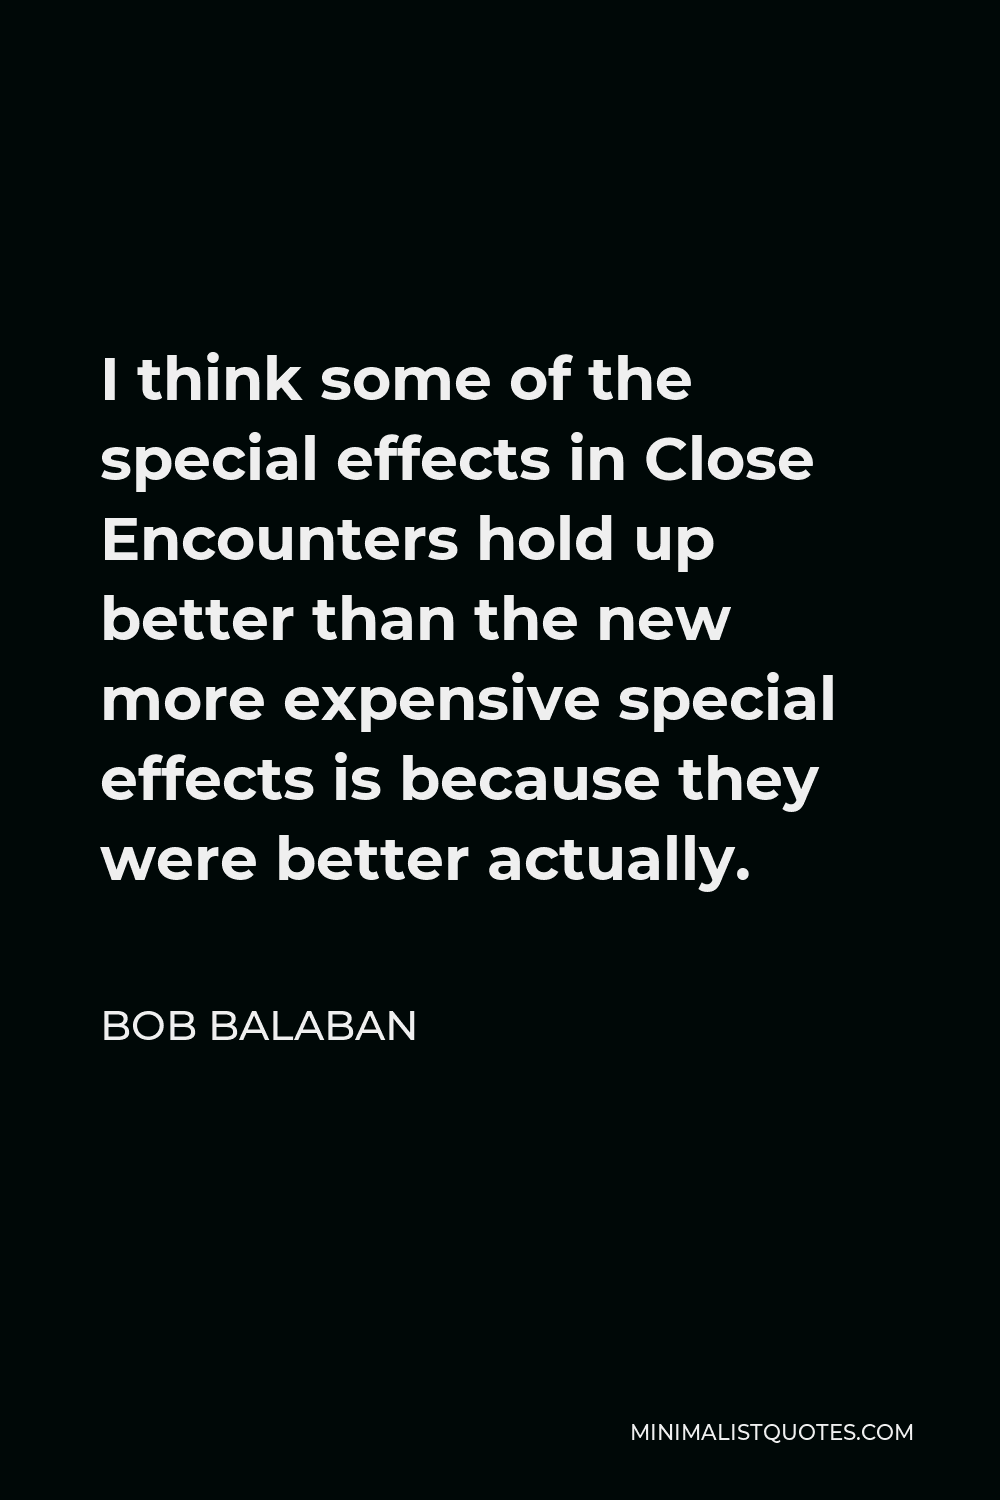 Bob Balaban Quote - I think some of the special effects in Close Encounters hold up better than the new more expensive special effects is because they were better actually.